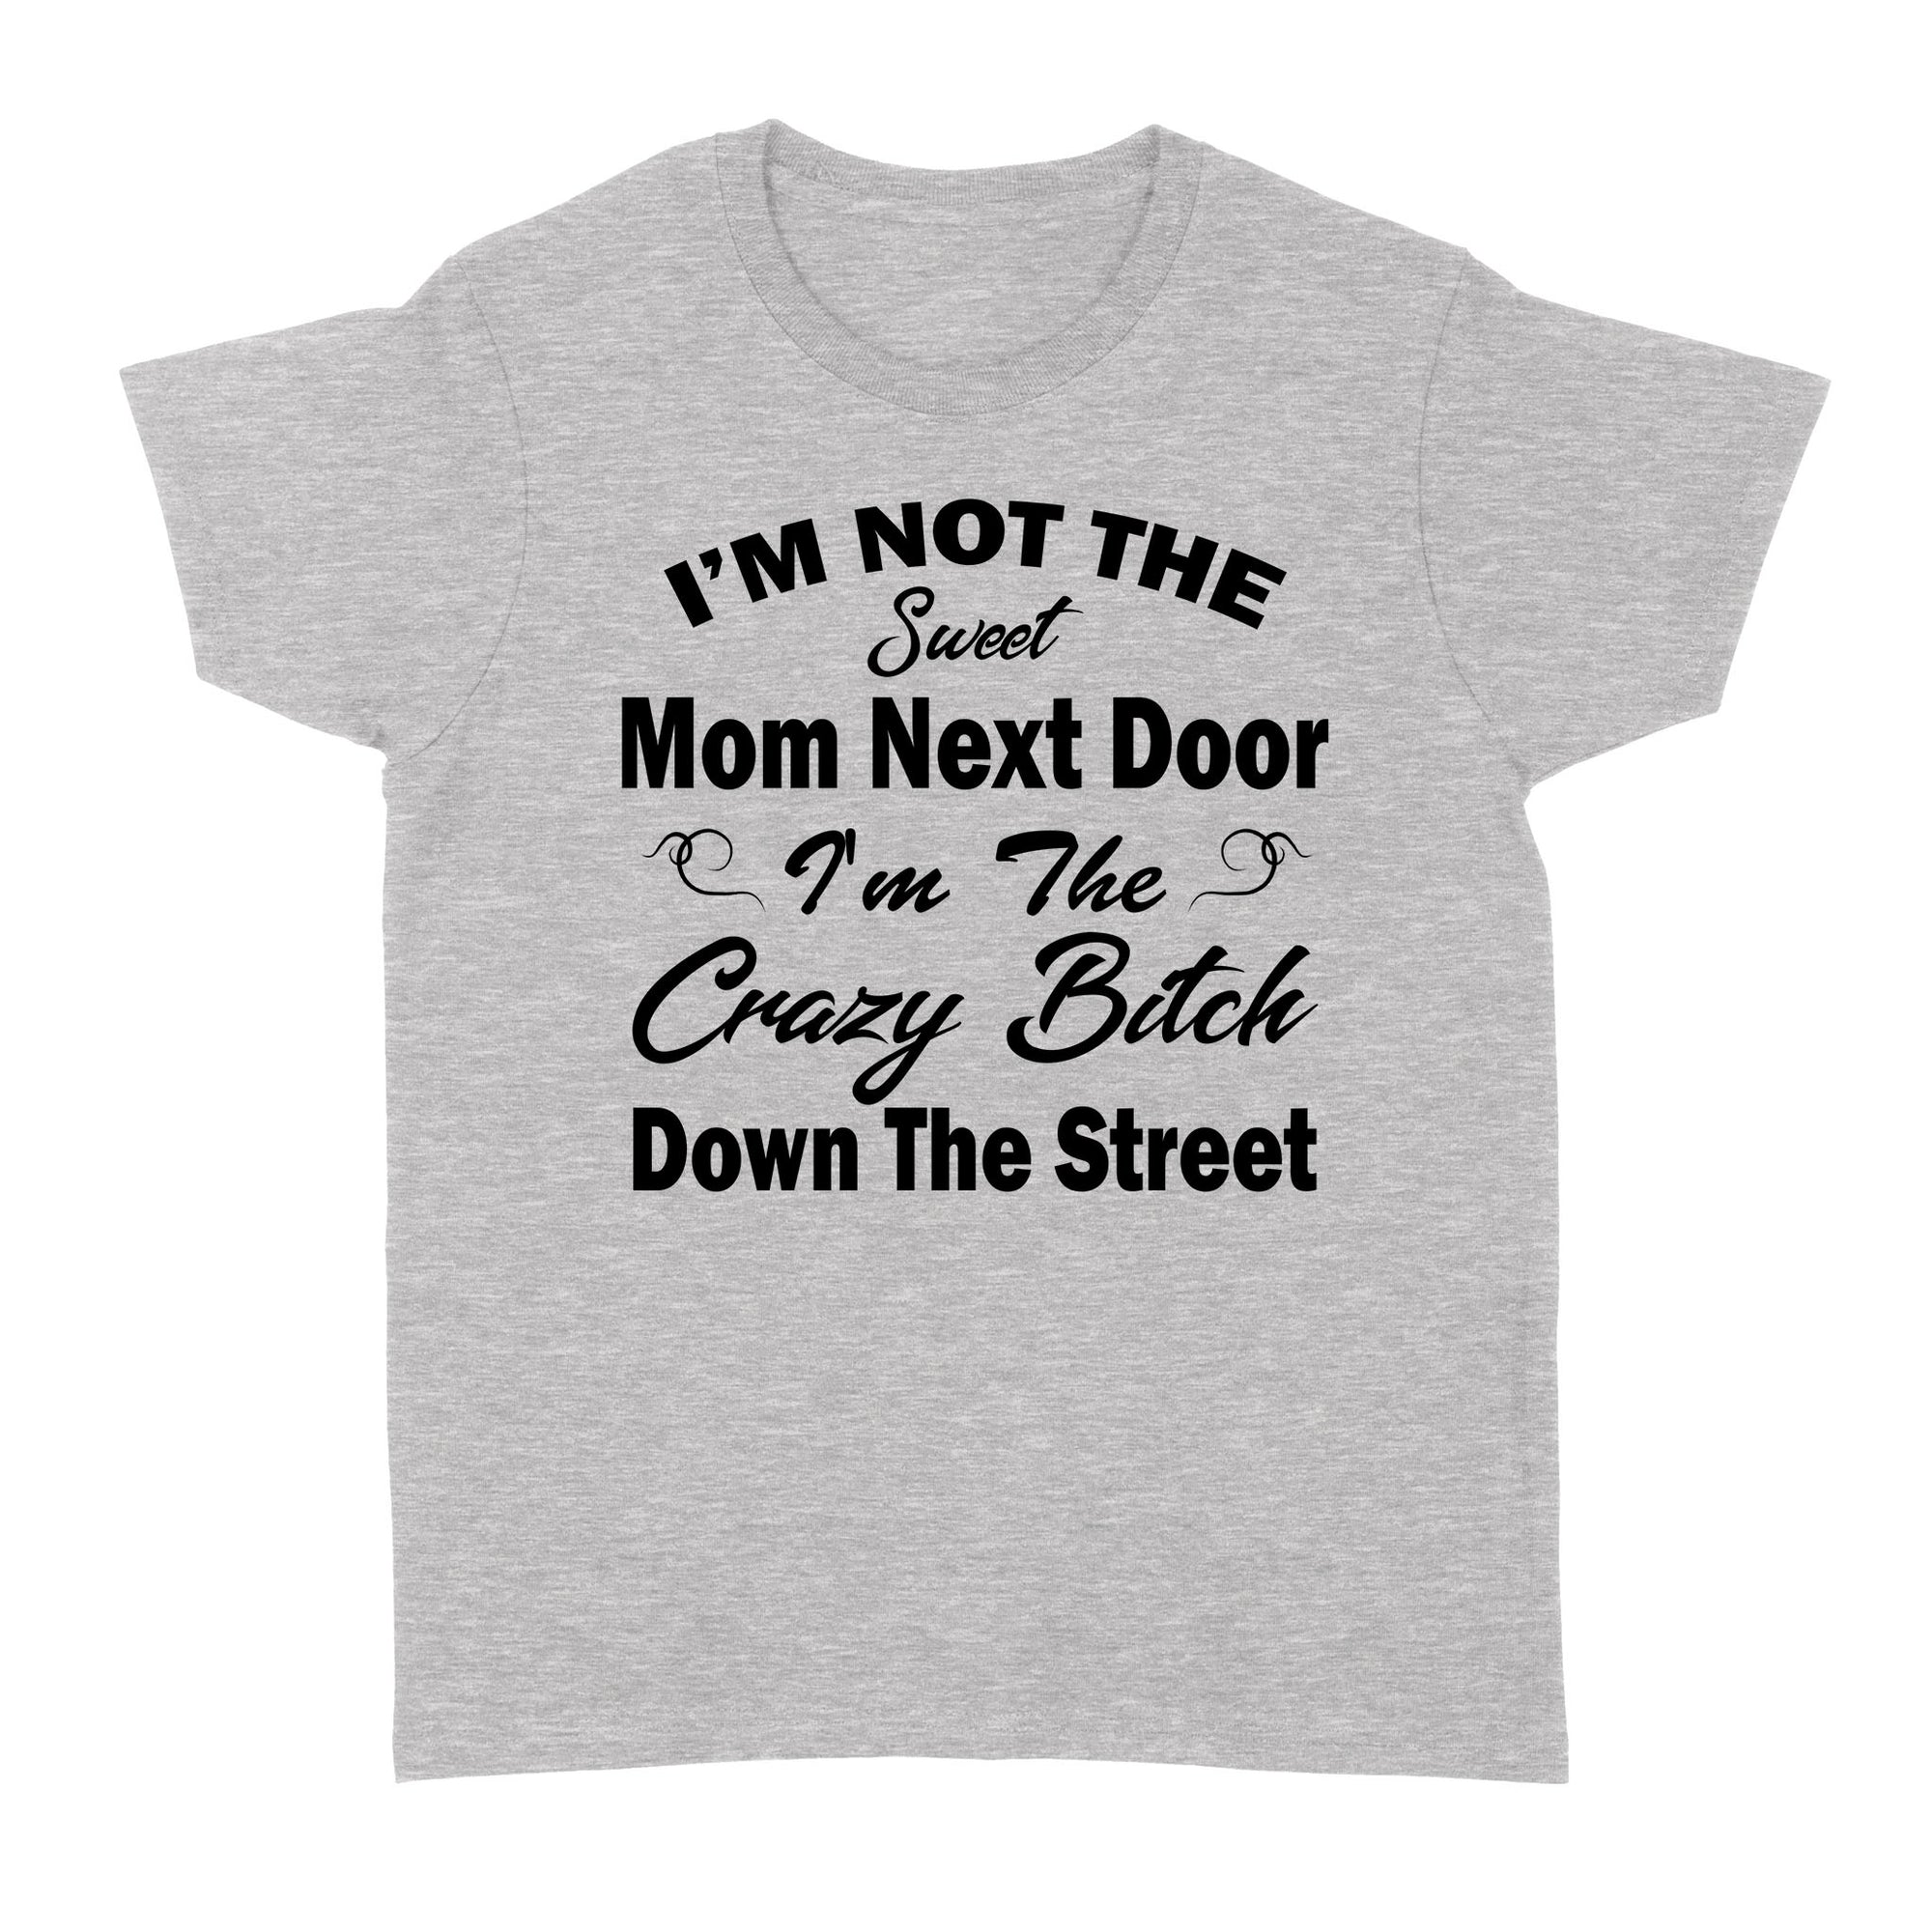 Gift Ideas for Mom Mothers Day I'm Not The Sweet Mom Next Door I'm The Crazy Bitch Down The Street (2) - Standard Women's T-shirt